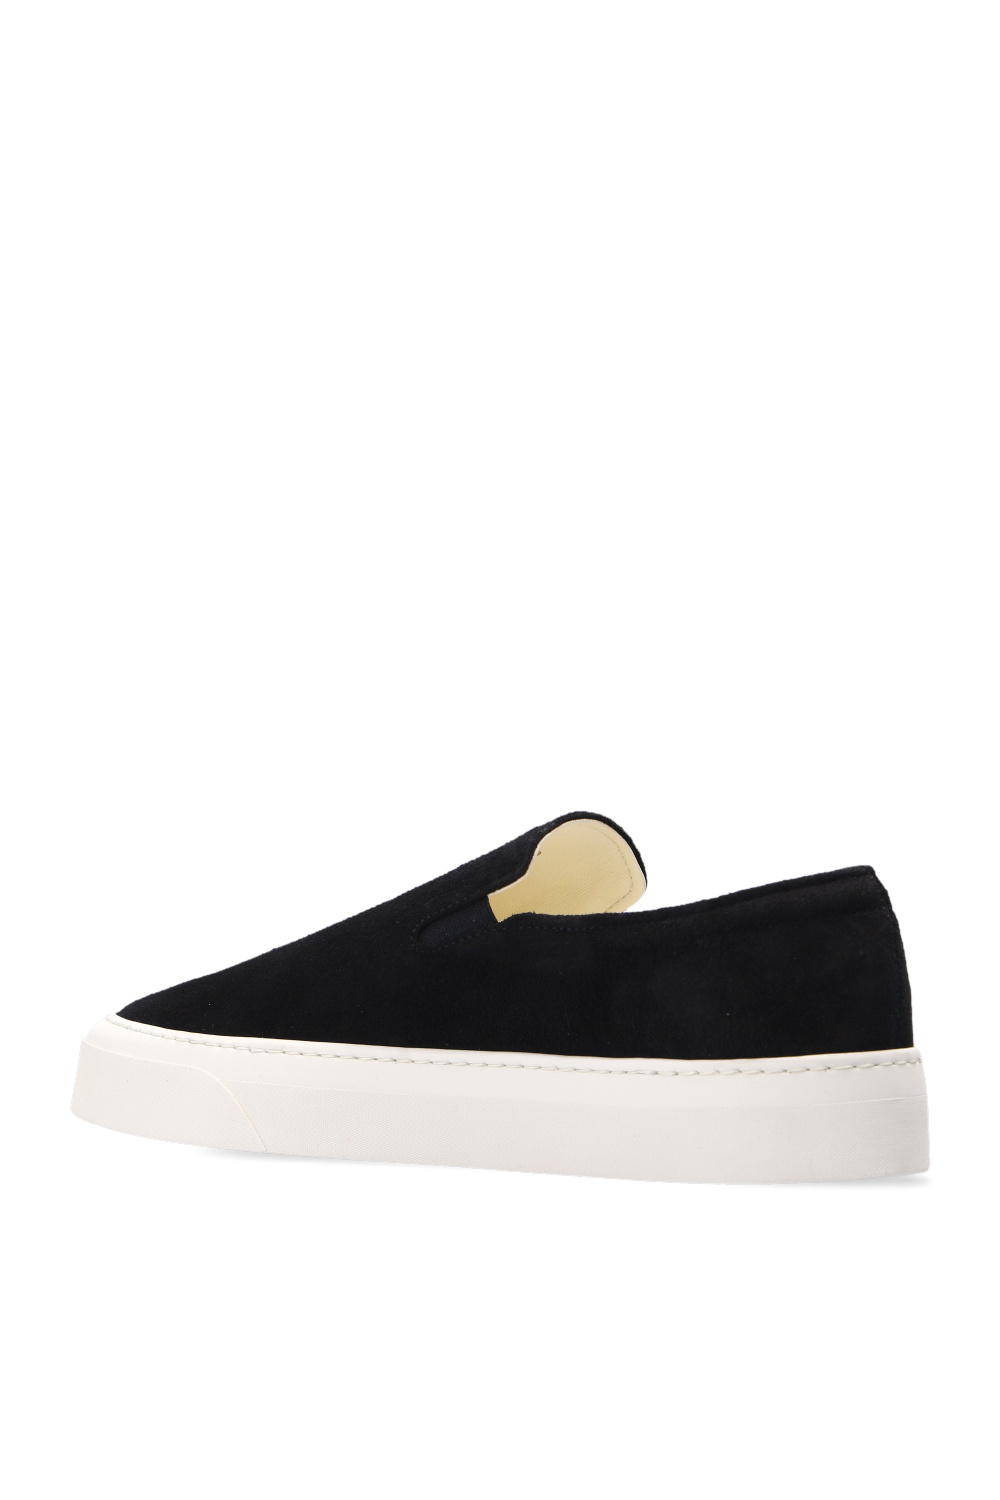 The Row 'Marie H' sneakers | Women's Shoes | Vitkac